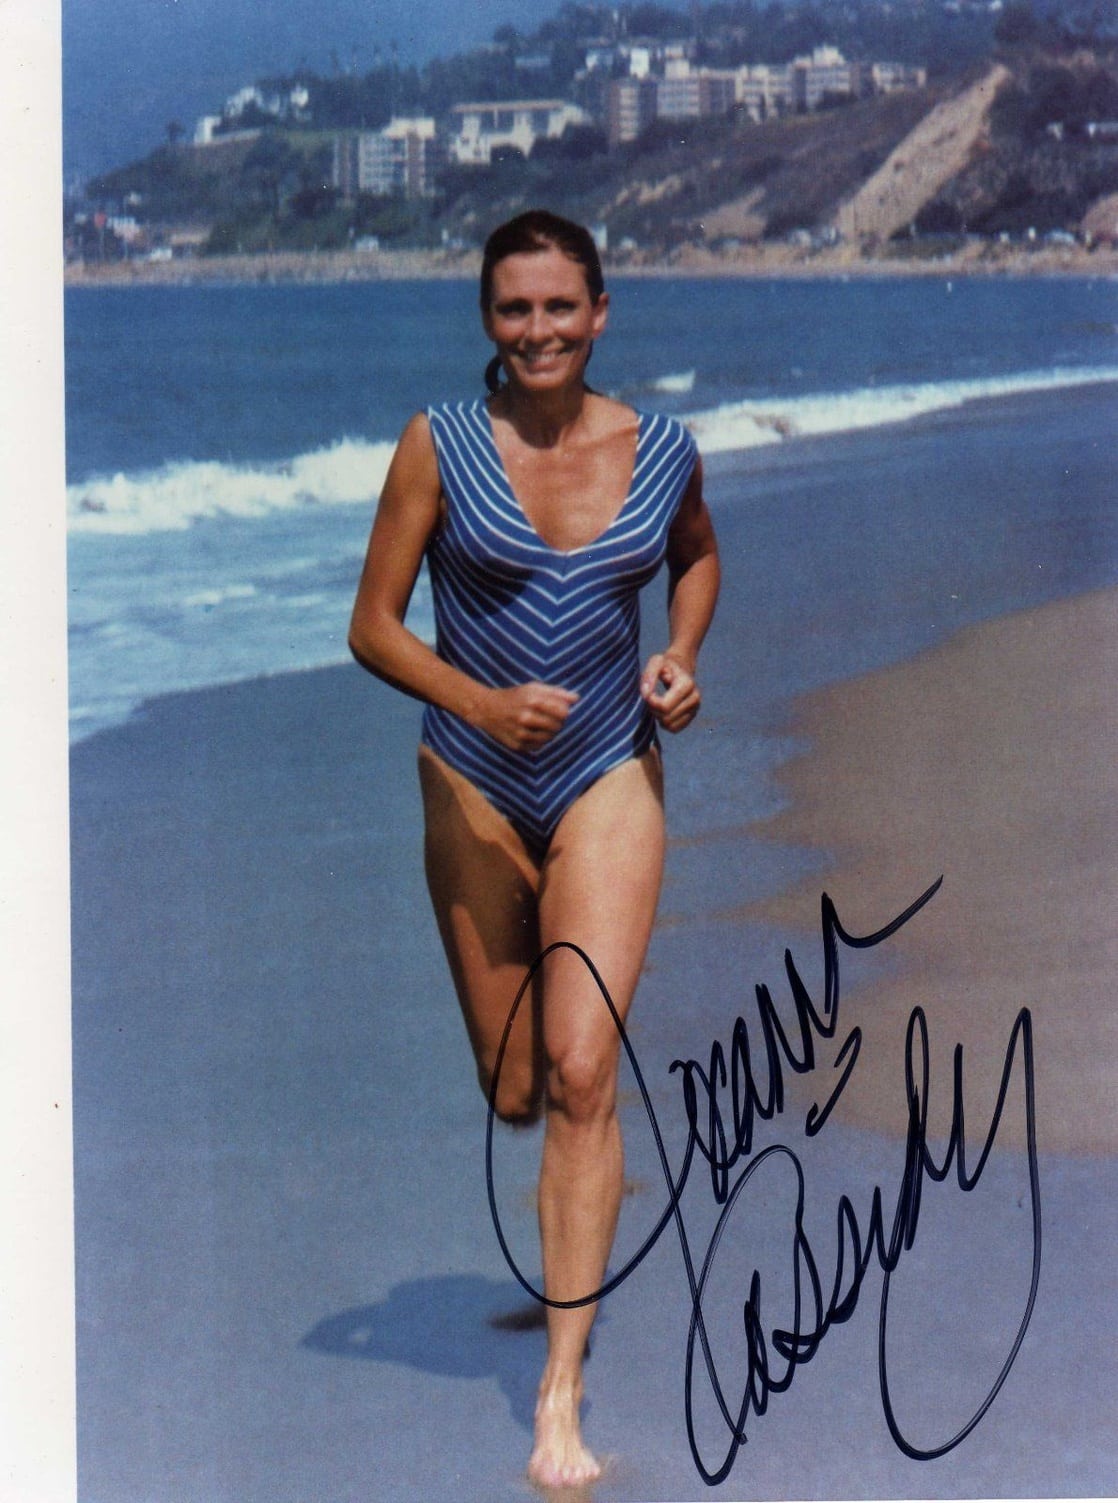 Picture Of Joanna Cassidy